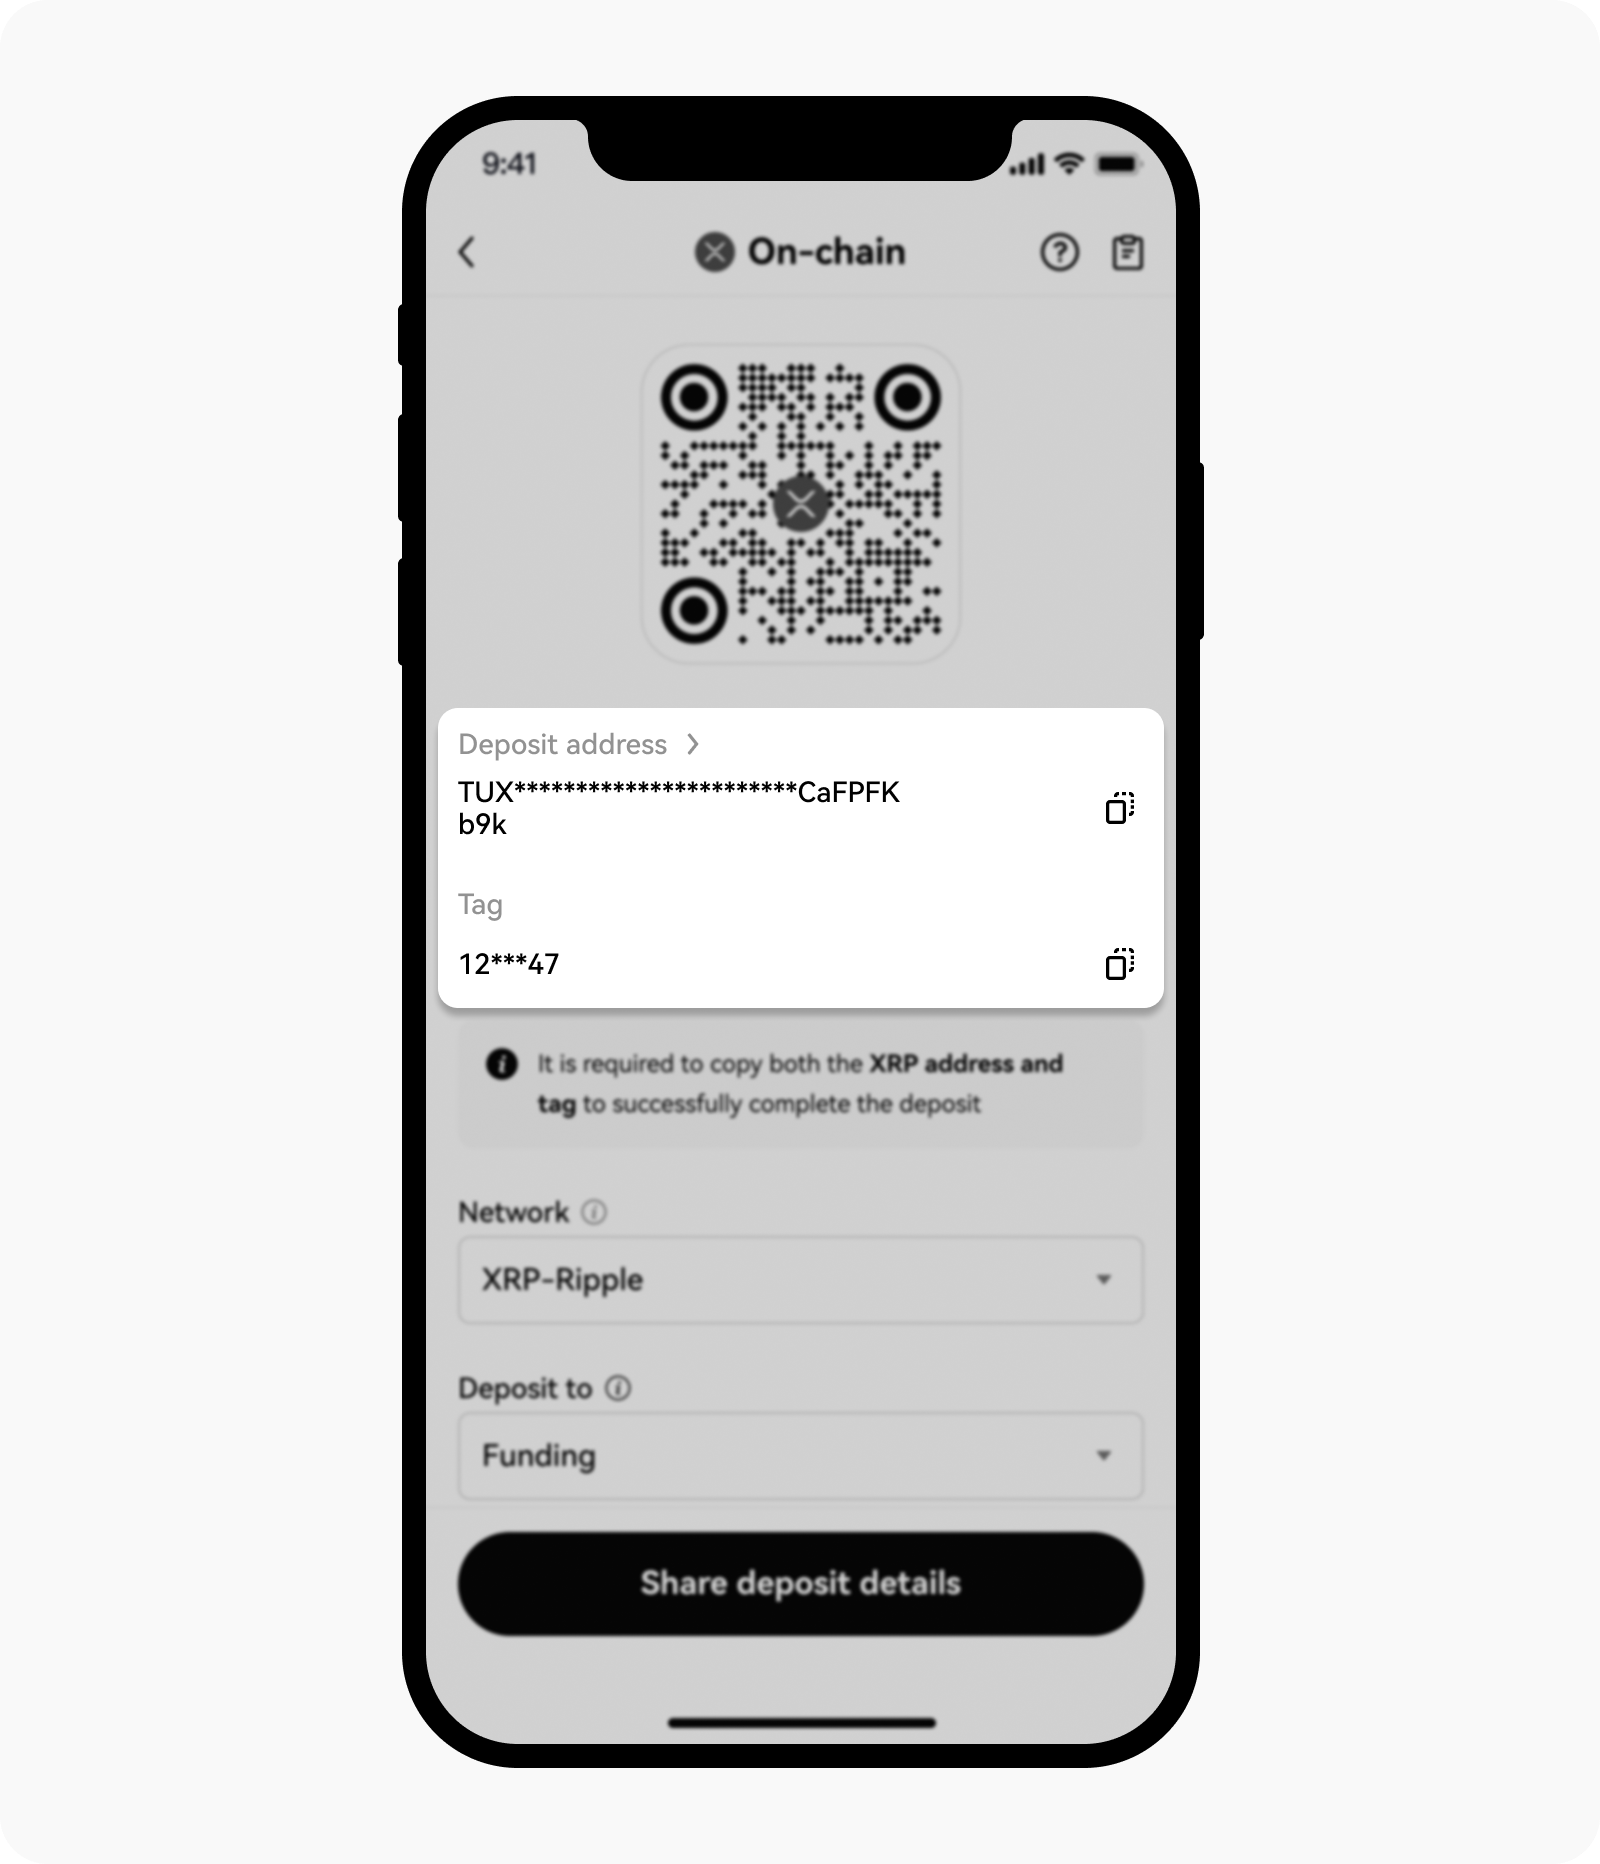 CT-app-deposit on chain with tag